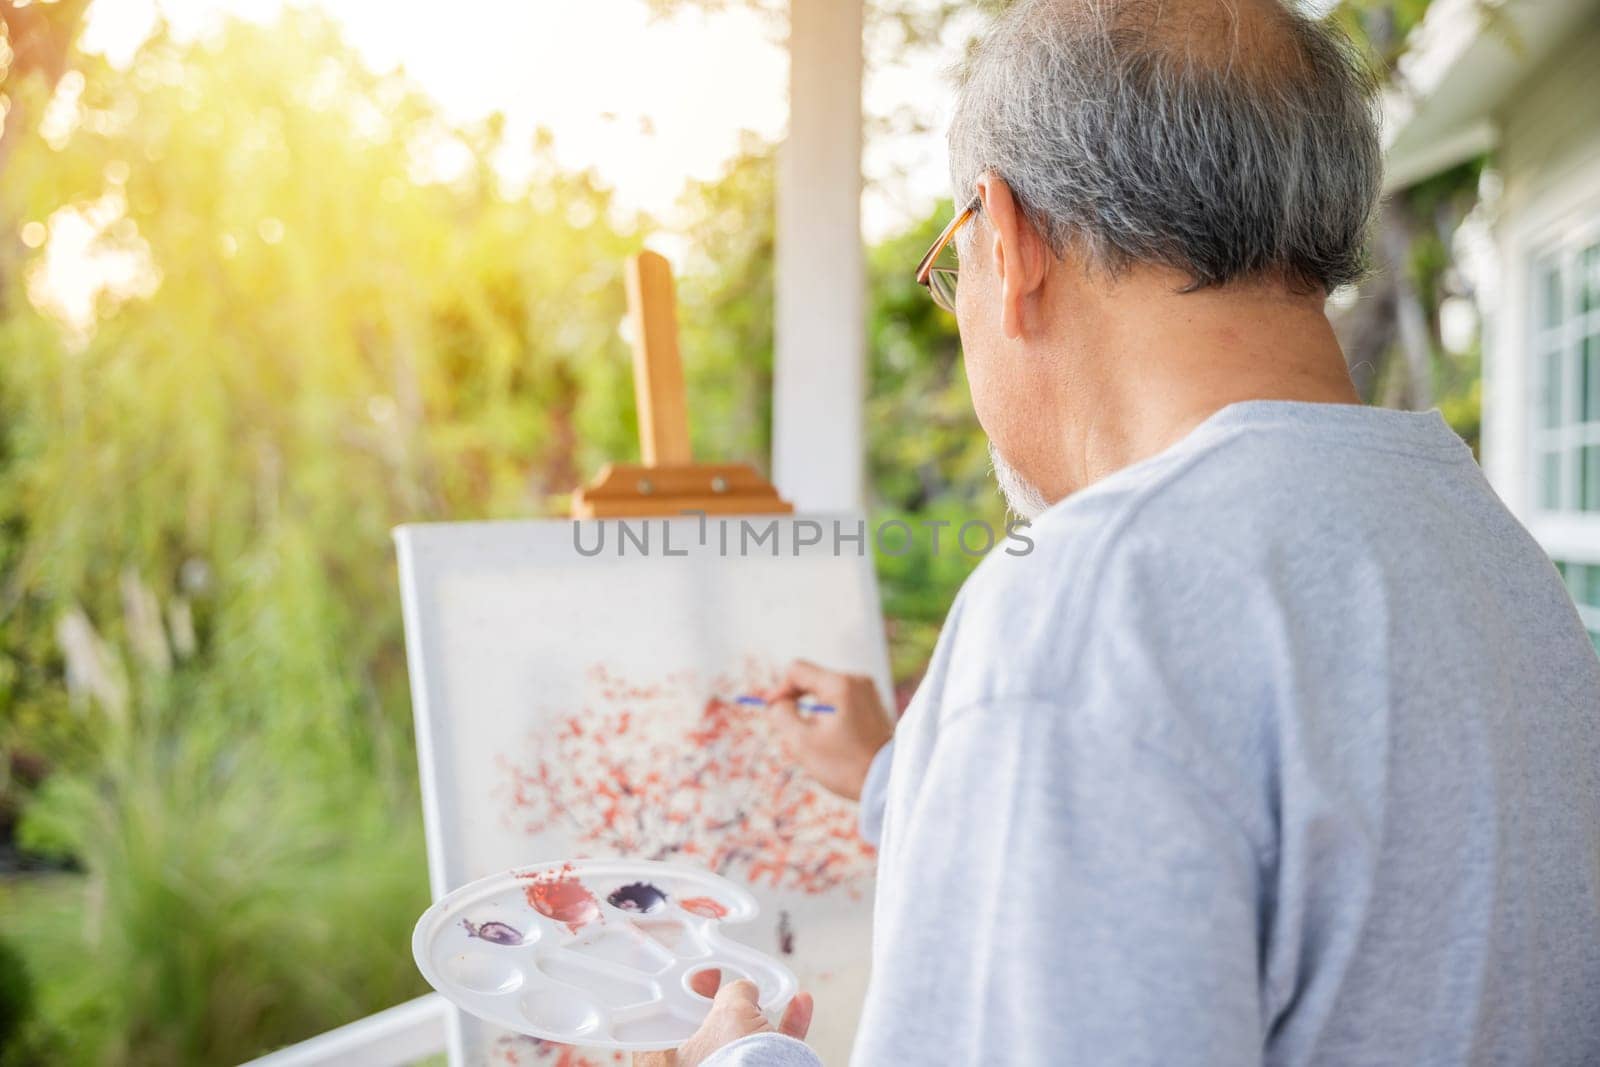 Asian senior old man painting picture using brush and oil color on canvas by Sorapop